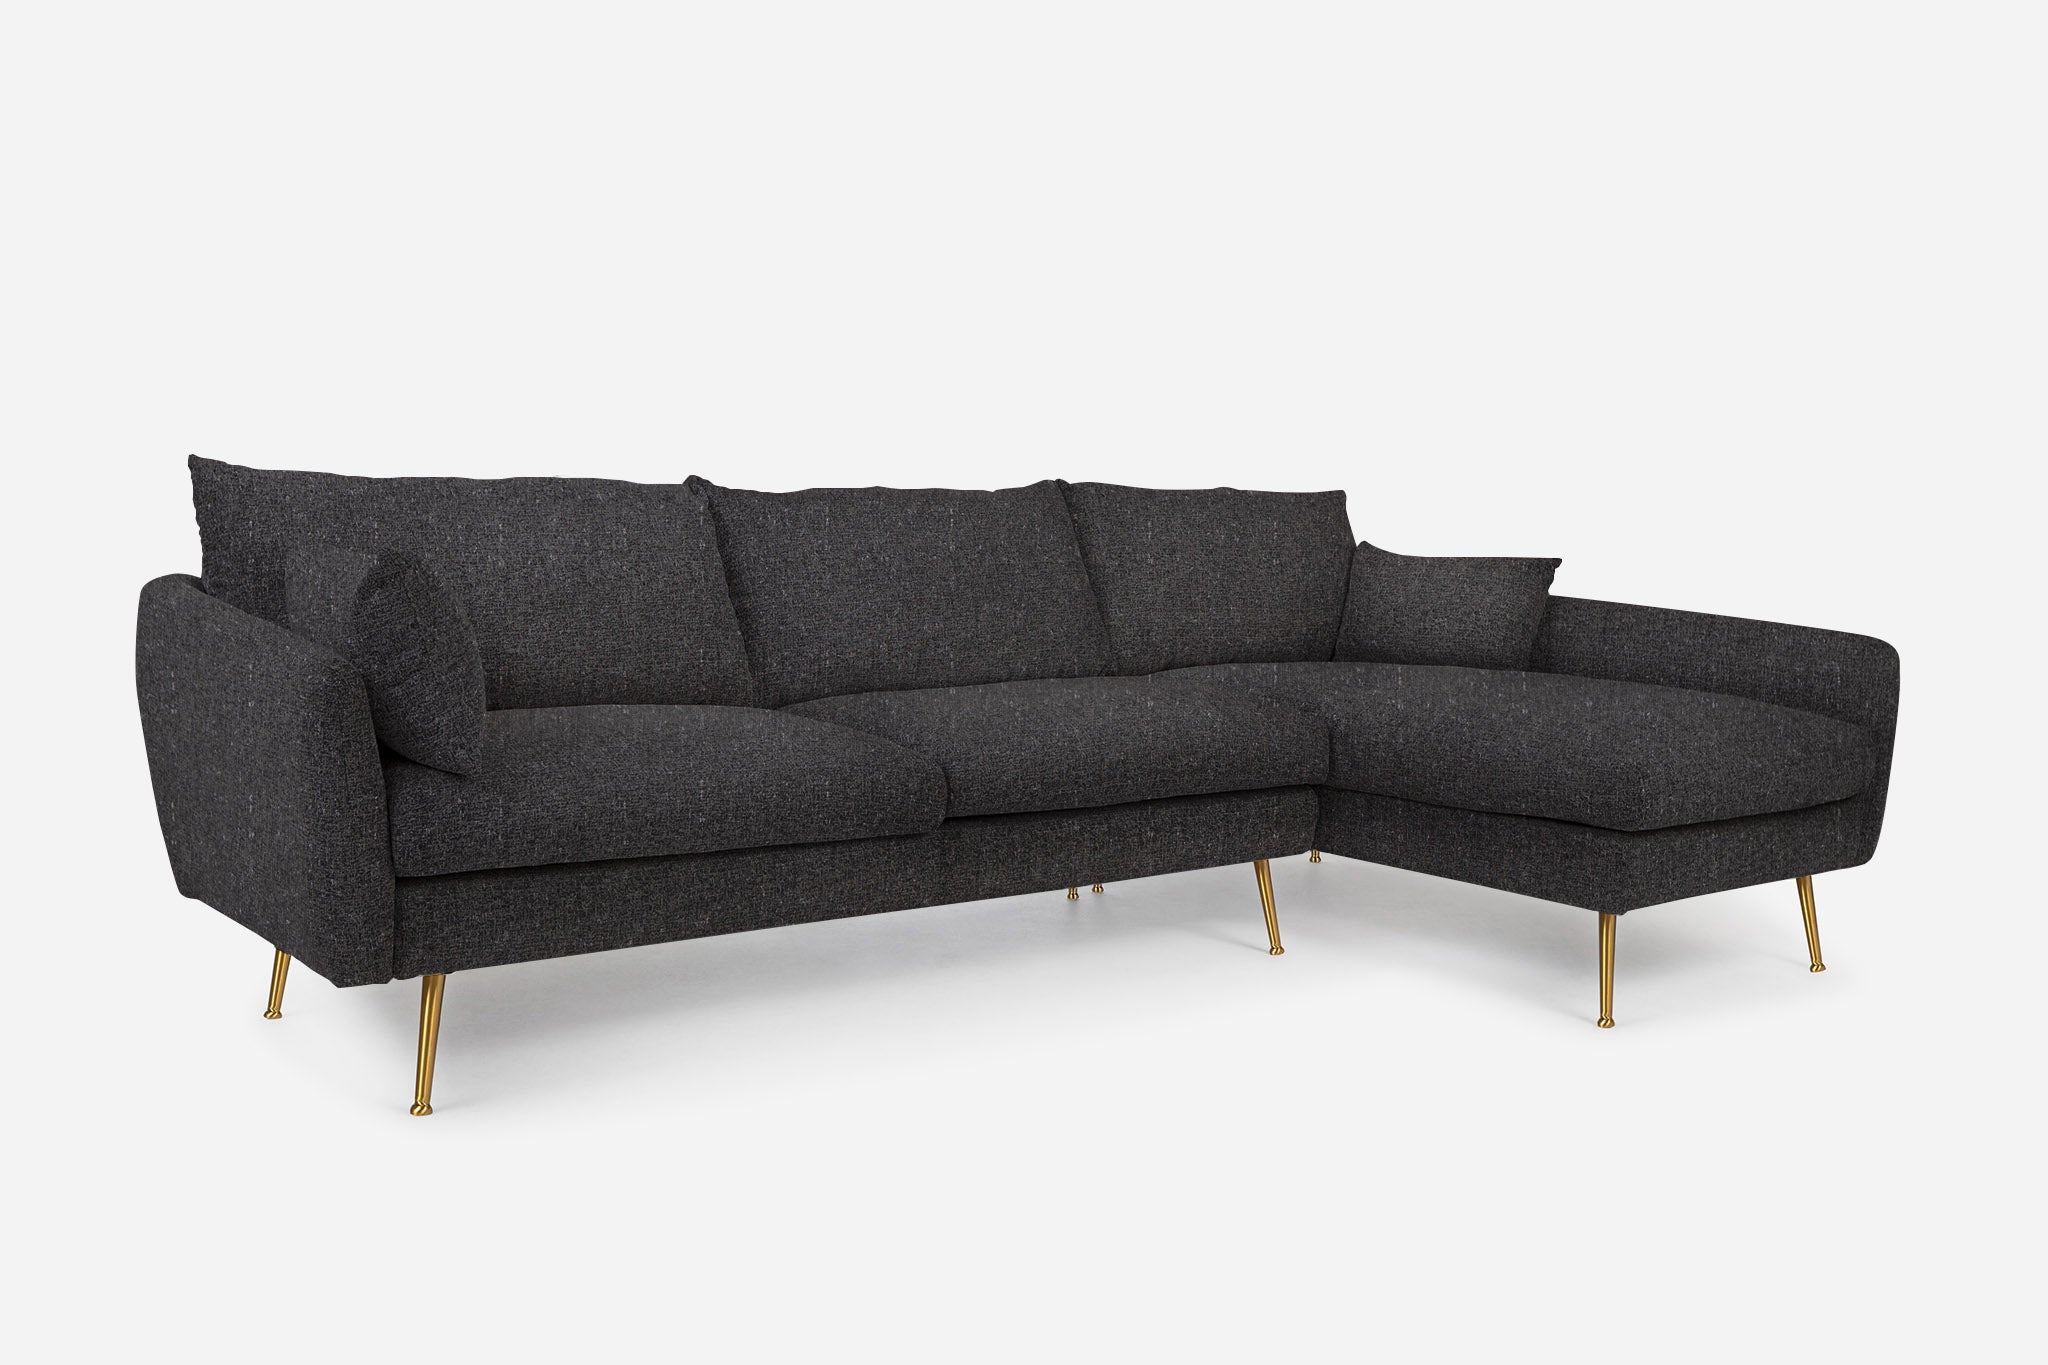 park sectional sofa shown in charcoal with gold legs right facing